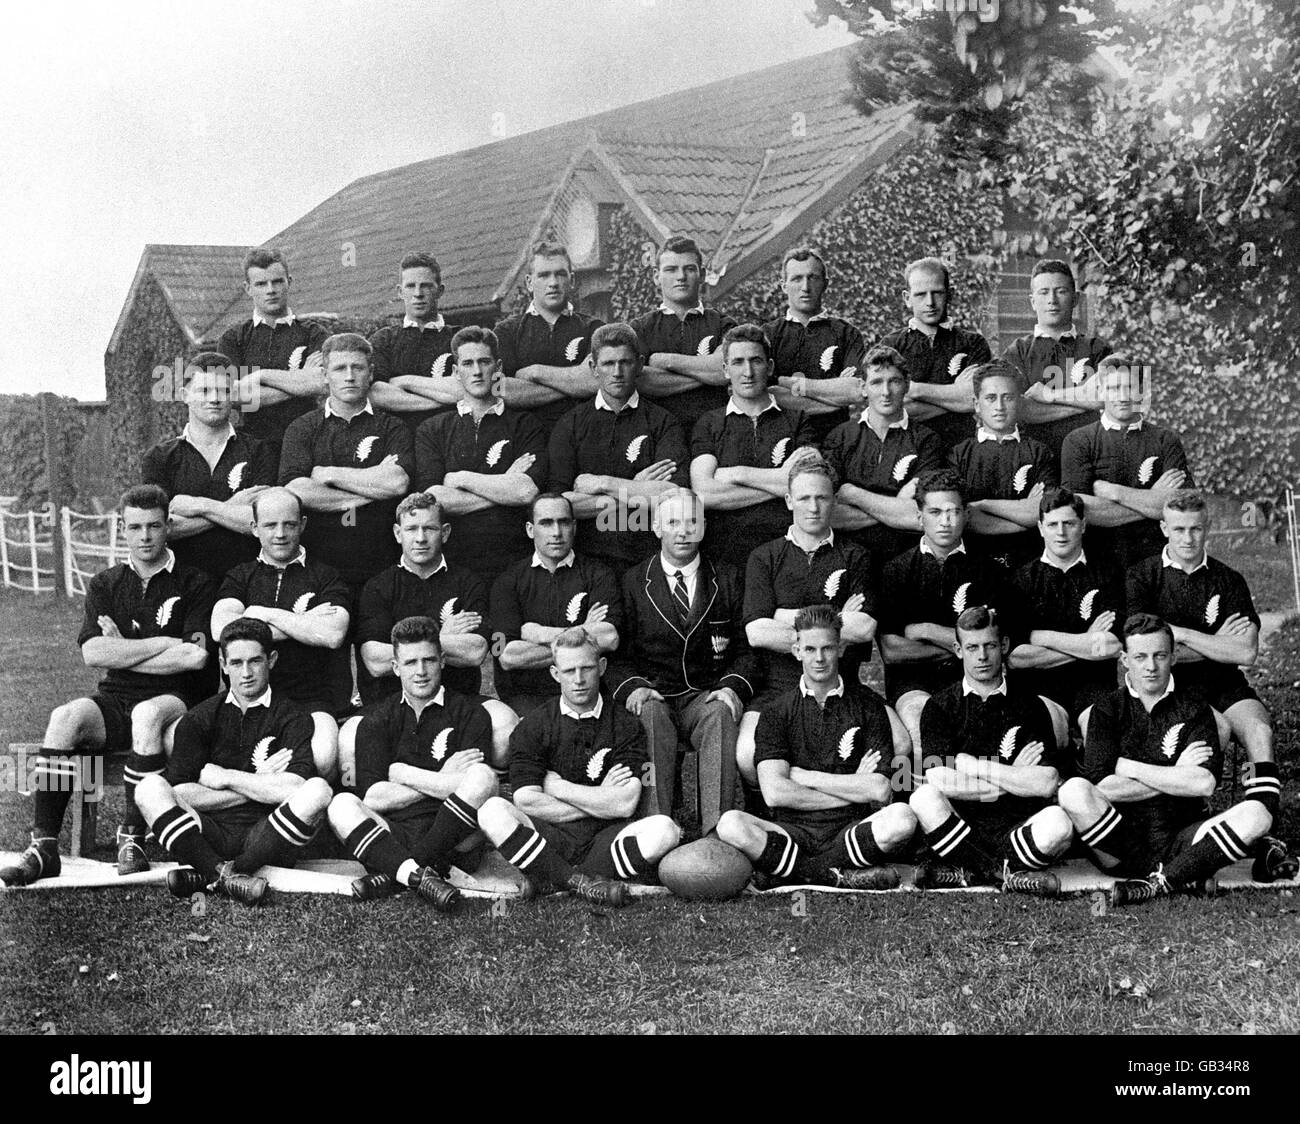 New Zealand squad: (back row, l-r) Handley Brown, Mark Nicholls, Read Masters, Ian Harvey, Jim Parker, Quentin Donald, Brian McCleary; (second row, l-r) Jack Steel, Maurice Brownlie, Ron Stewart, Cyril Brownlie, Les Cupples, Son West, Lui Paewai, Andrew White; (third row, l-r) Alan Robilliard, Abe Munro, Bull Irvine, Cliff Porter, manager SS Dean, Jock Richardson, George Nepia, Gus Hart, Bert Cooke; (front row, l-r) Jimmy Mill, Neil McGregor, Bill Dalley, Fred Lucas, Snowy Svenson, CEO Bradley Stock Photo